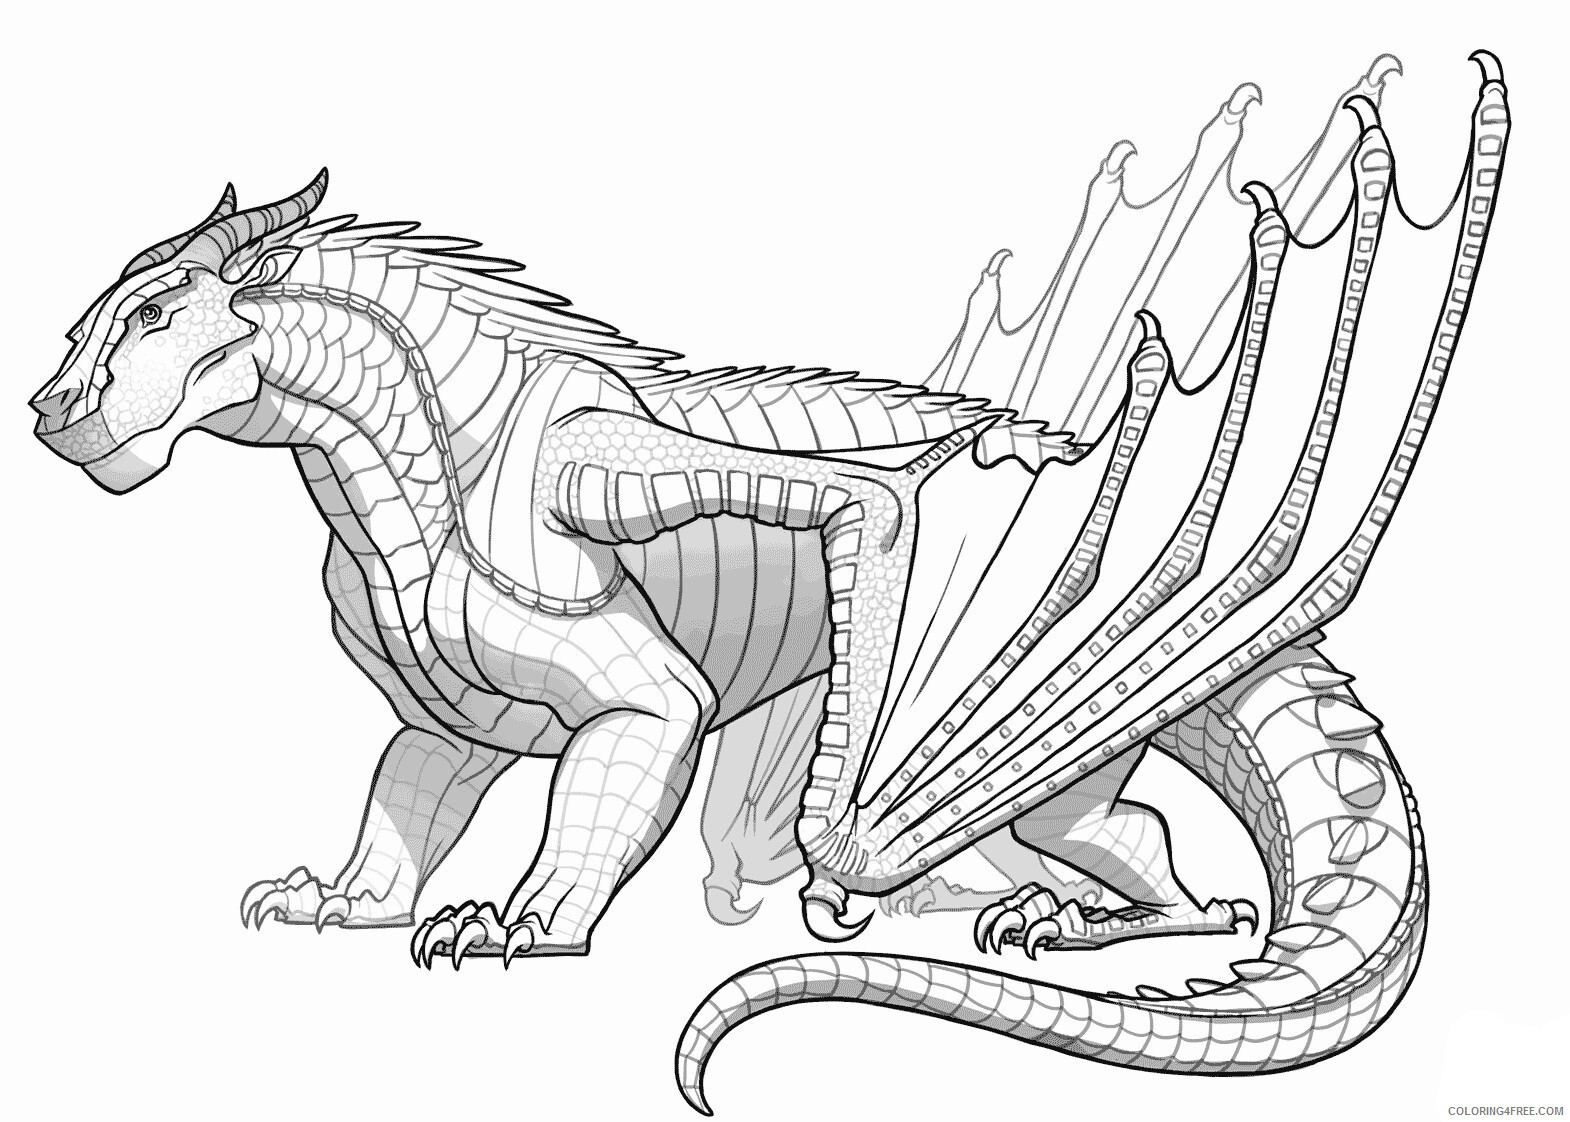 Fantasy Dragons Coloring Pages Printable Adult Dragon Printable 2021 2594 Coloring4free Coloring4free Com